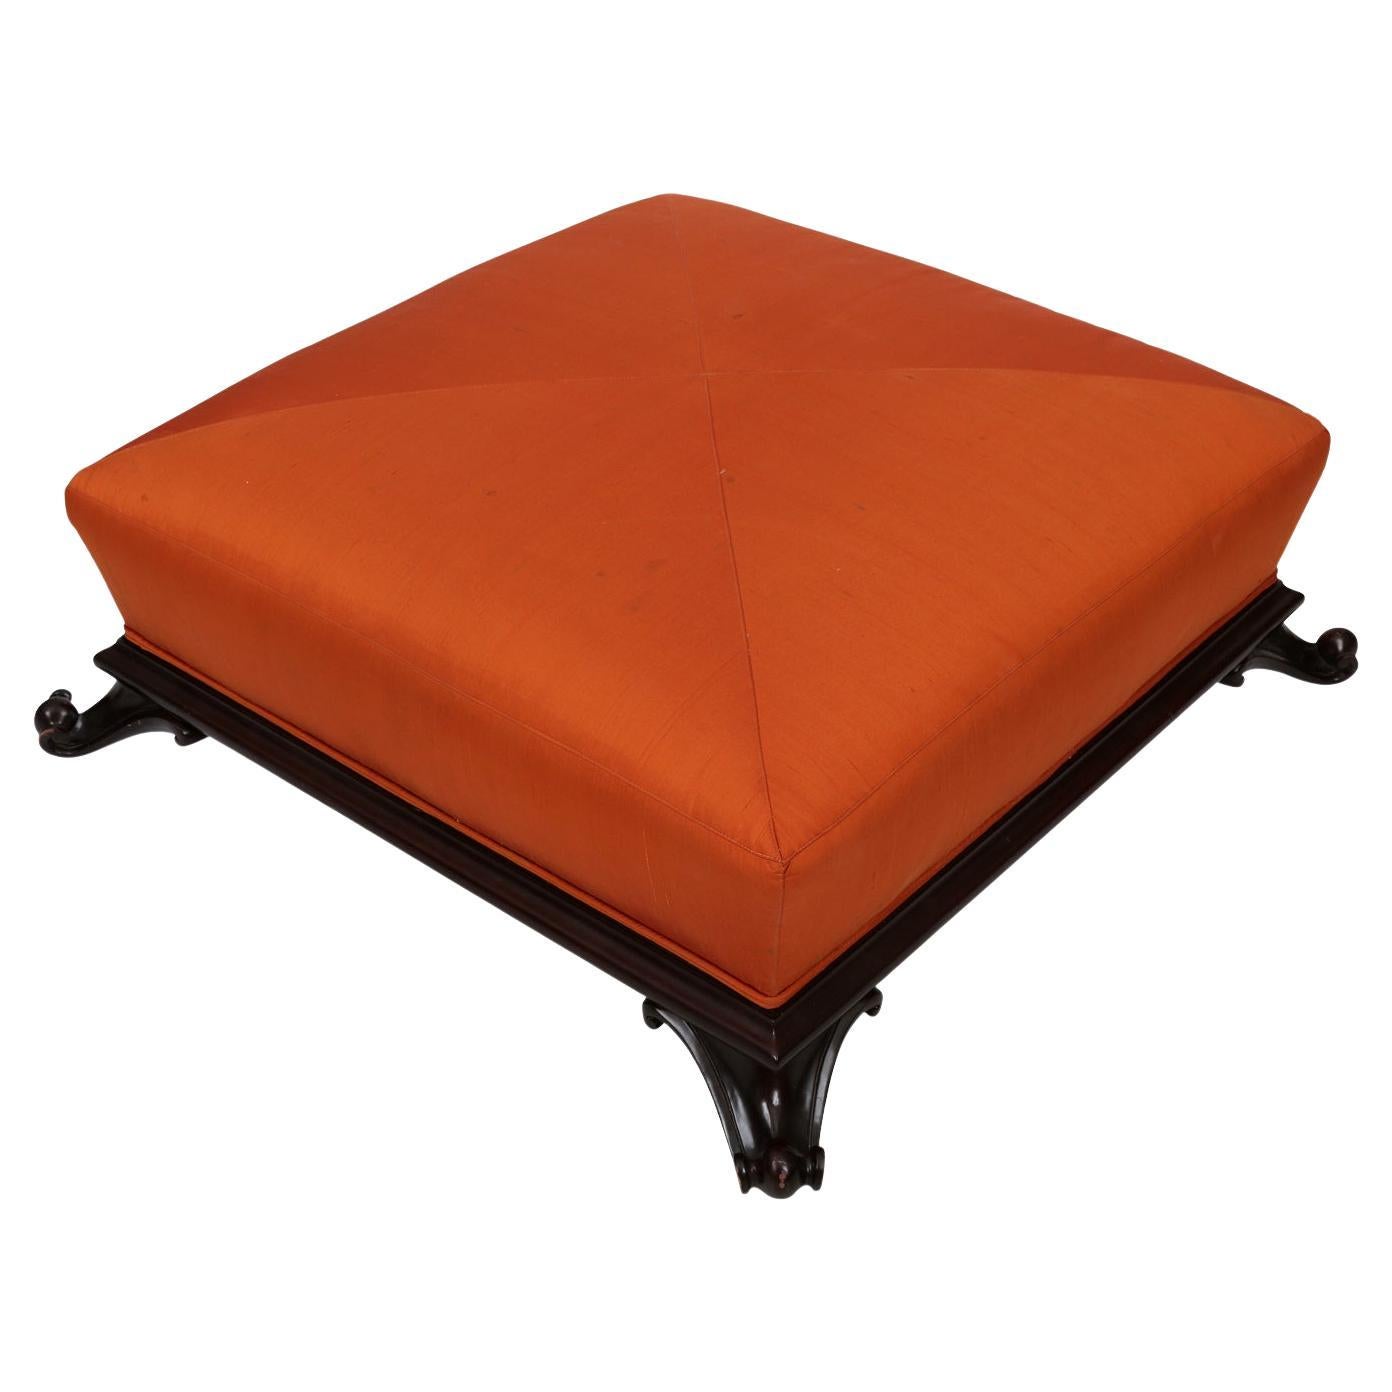 Frances Elkins Footed Turkish Ottoman in Orange Silk Upholstery For Sale